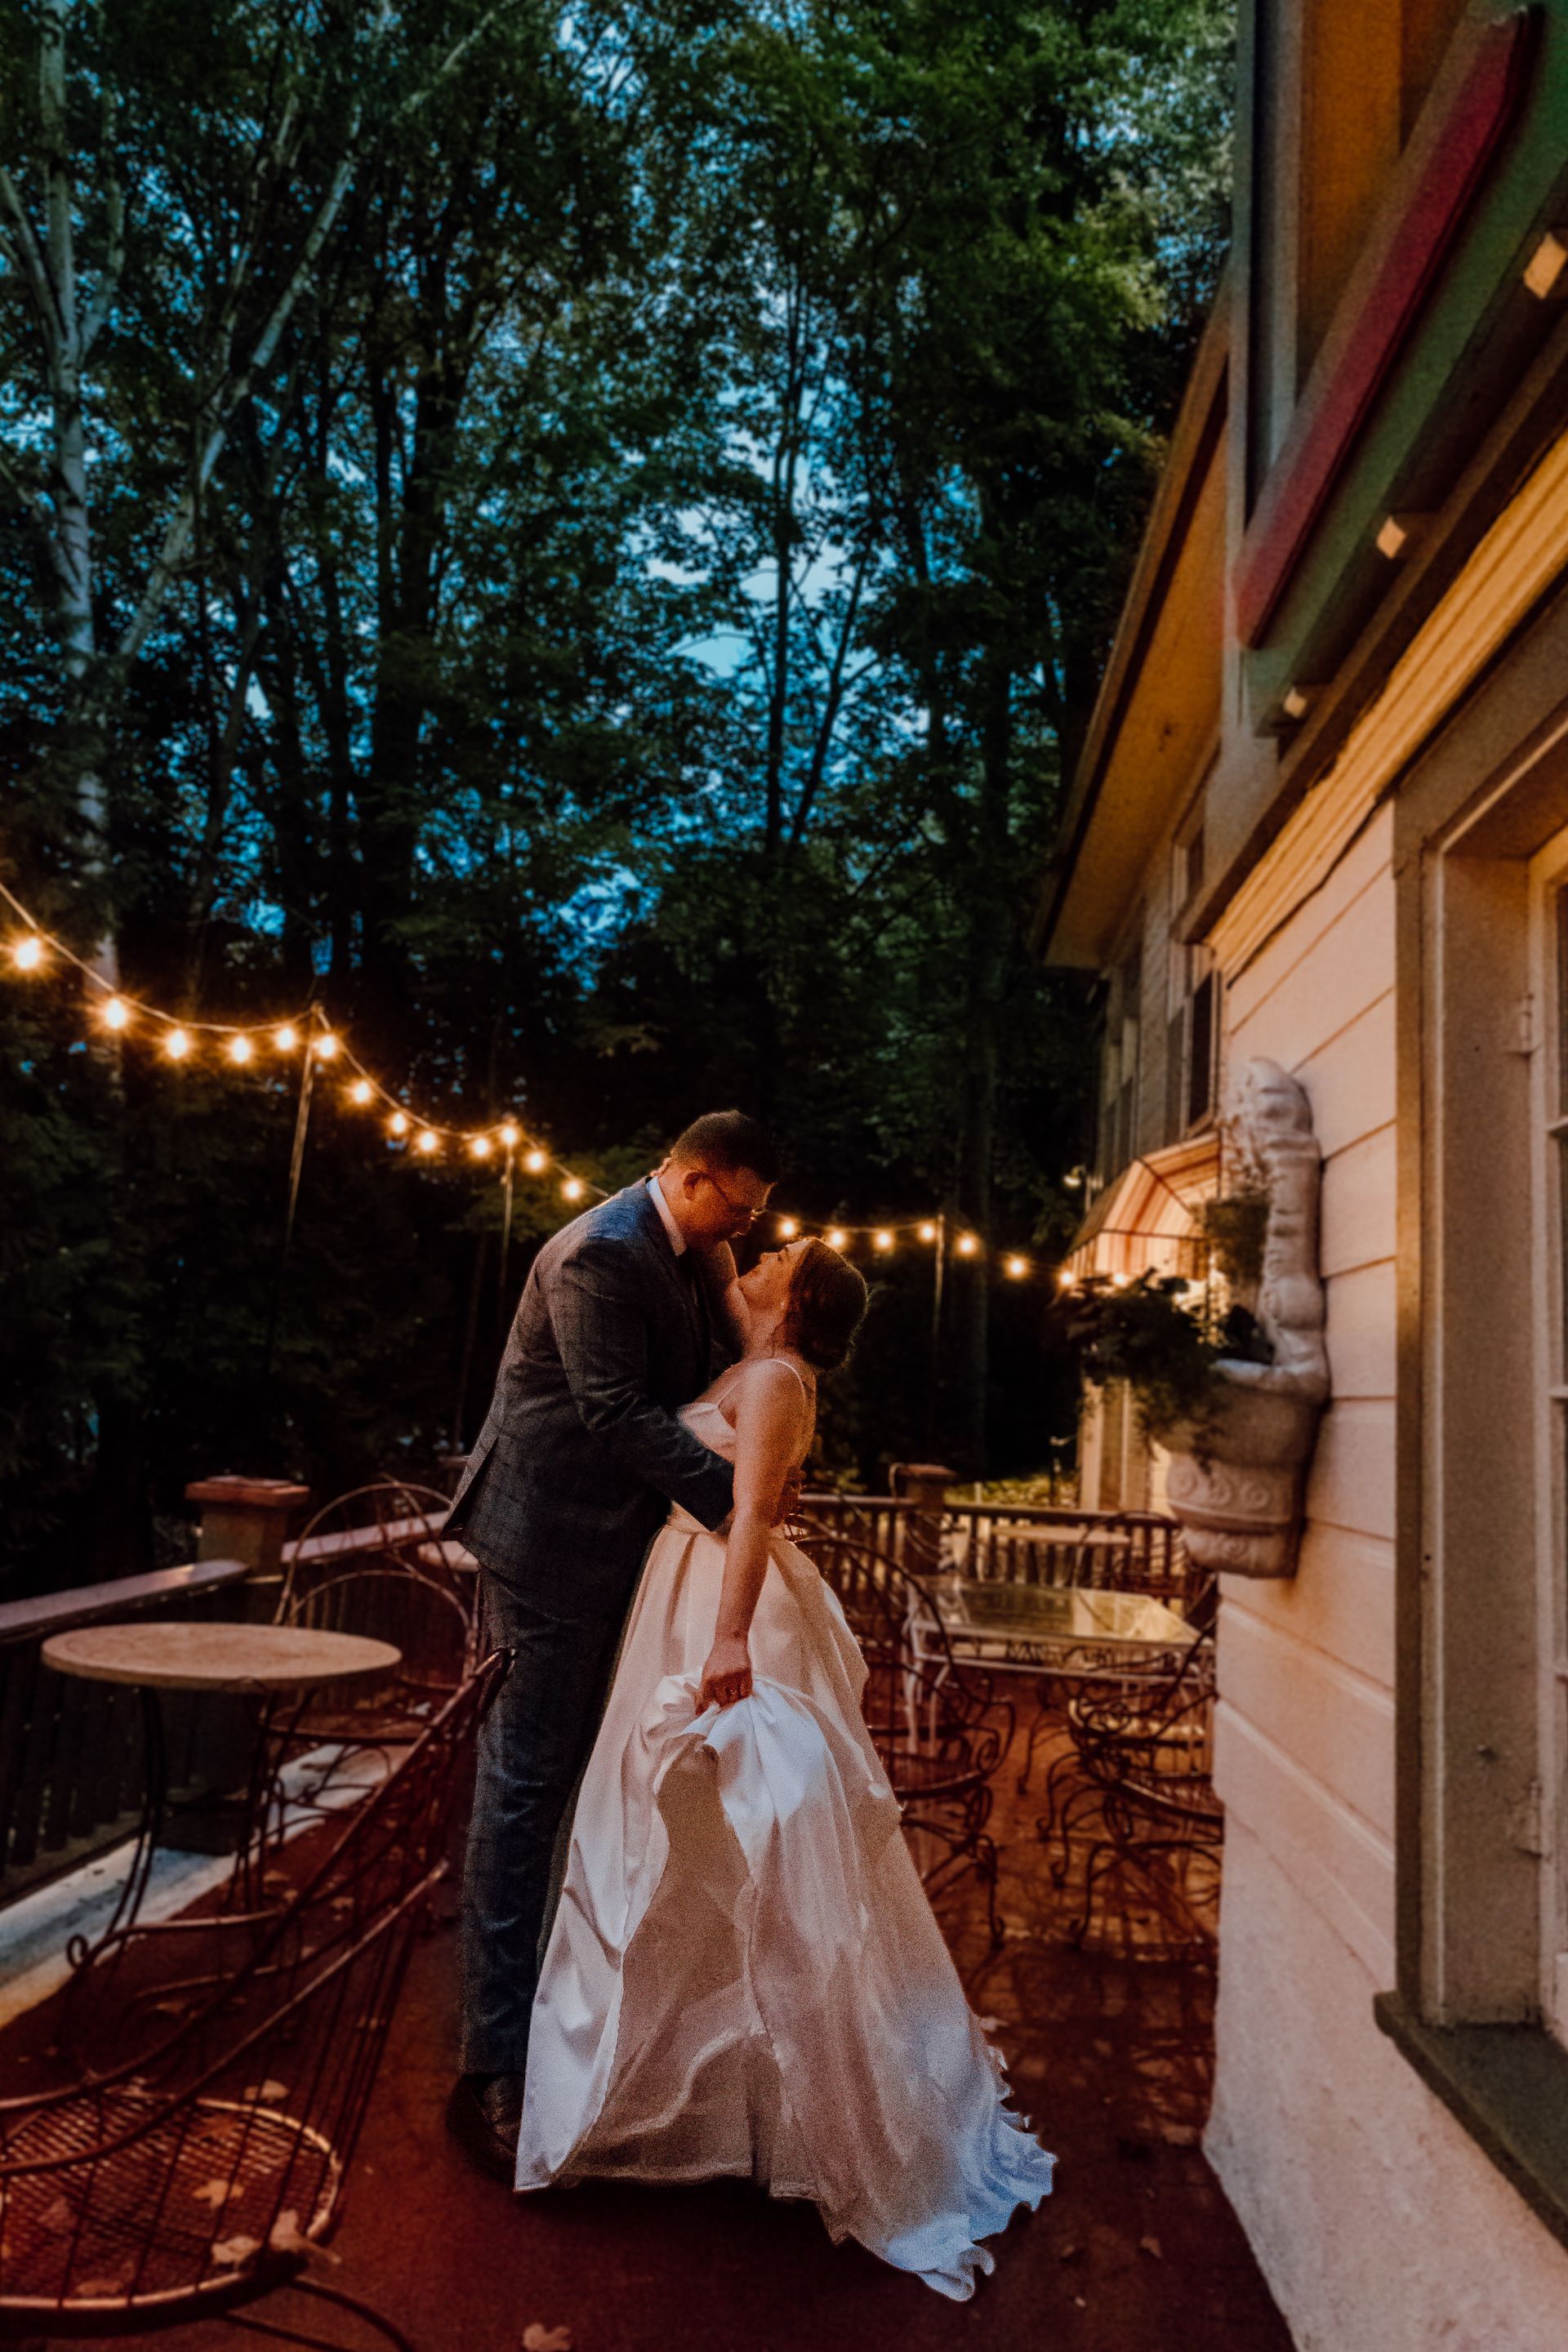 A bride and groom are kissing on a balcony under a string of lights.